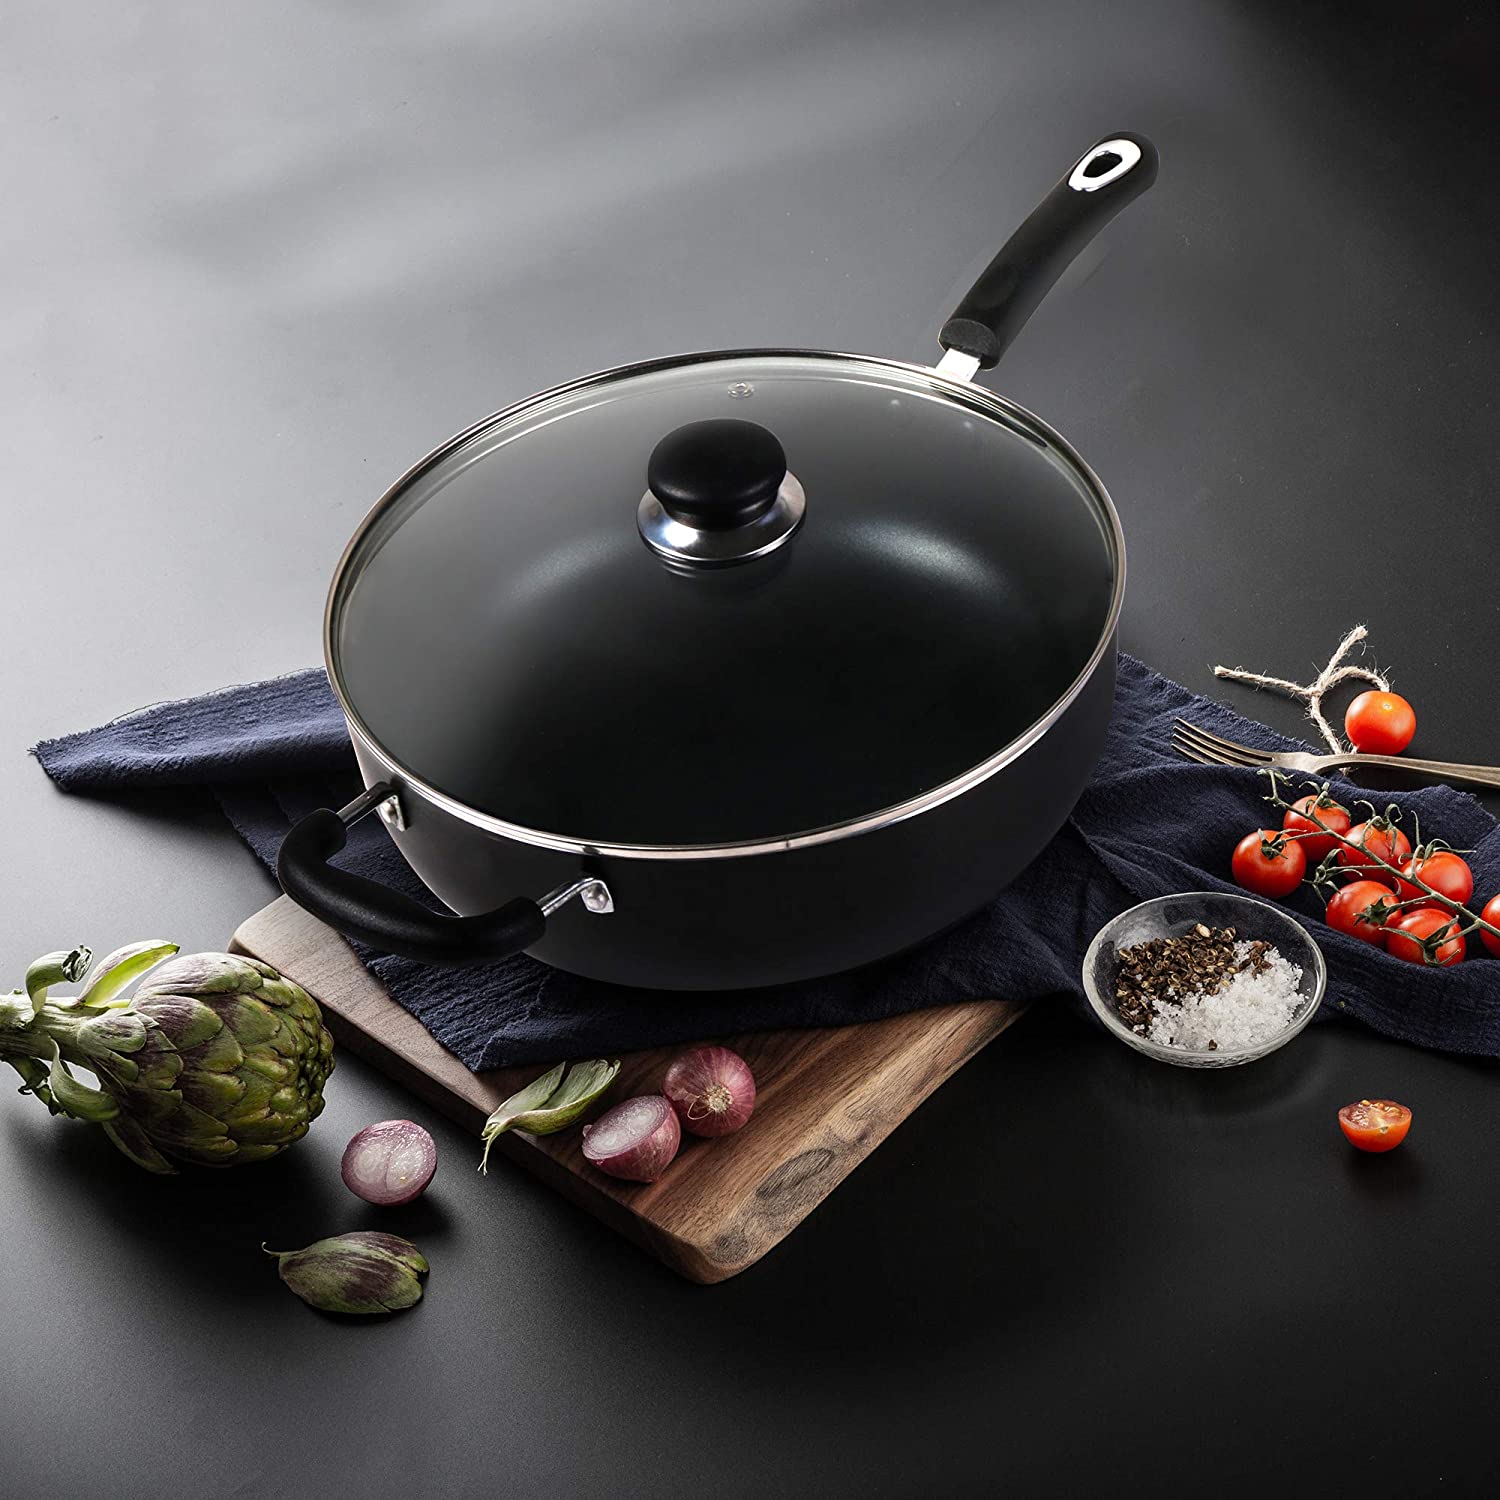 Utopia Kitchen Saute Fry Pan - Nonstick Frying Pan - 11 Inch Induction  Bottom - Aluminum Alloy and Scratch Resistant Body - Riveted Handle -  Ceramic